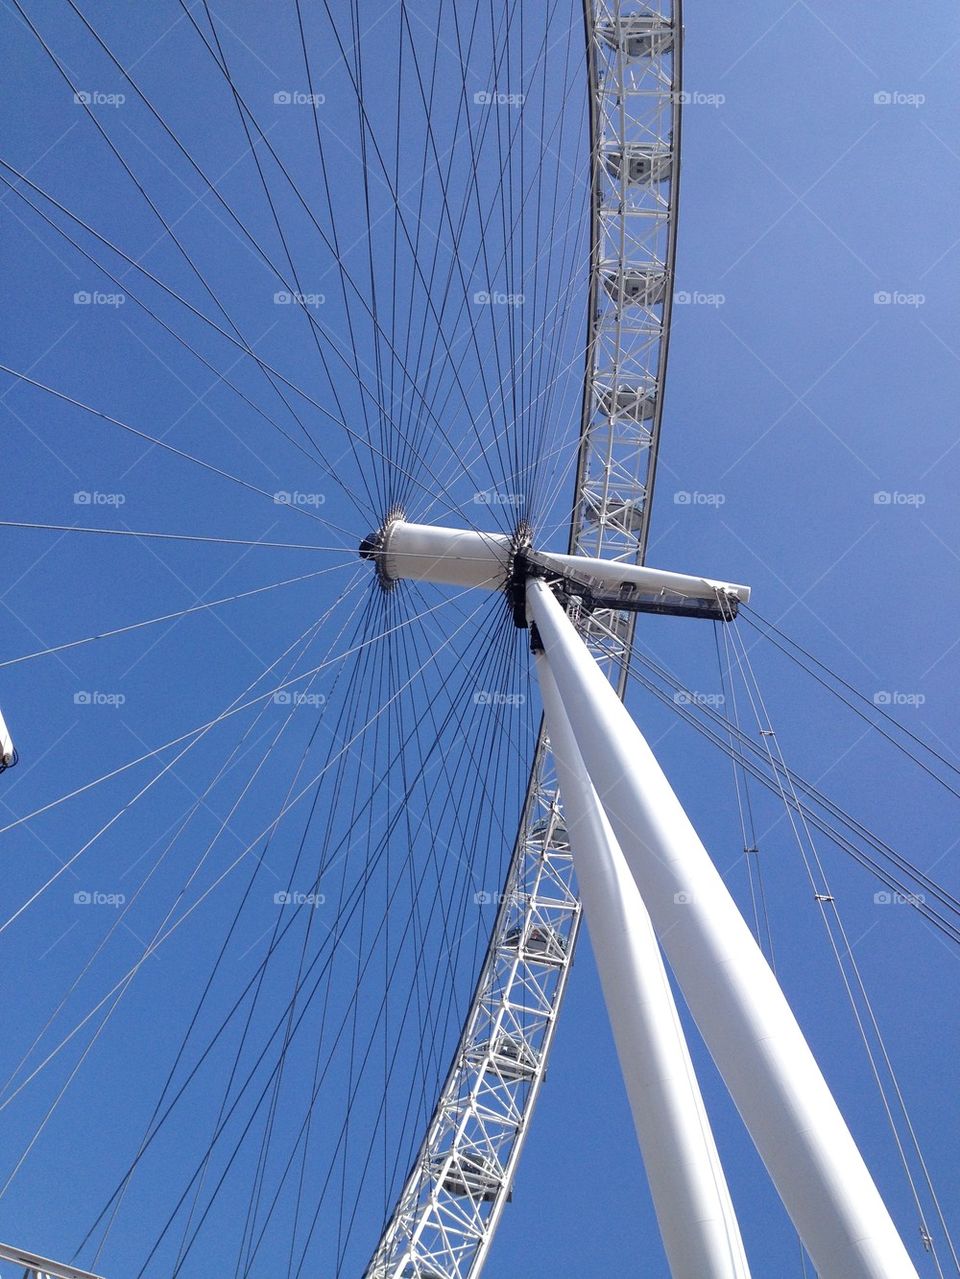 summer london eye attraction by anorbika